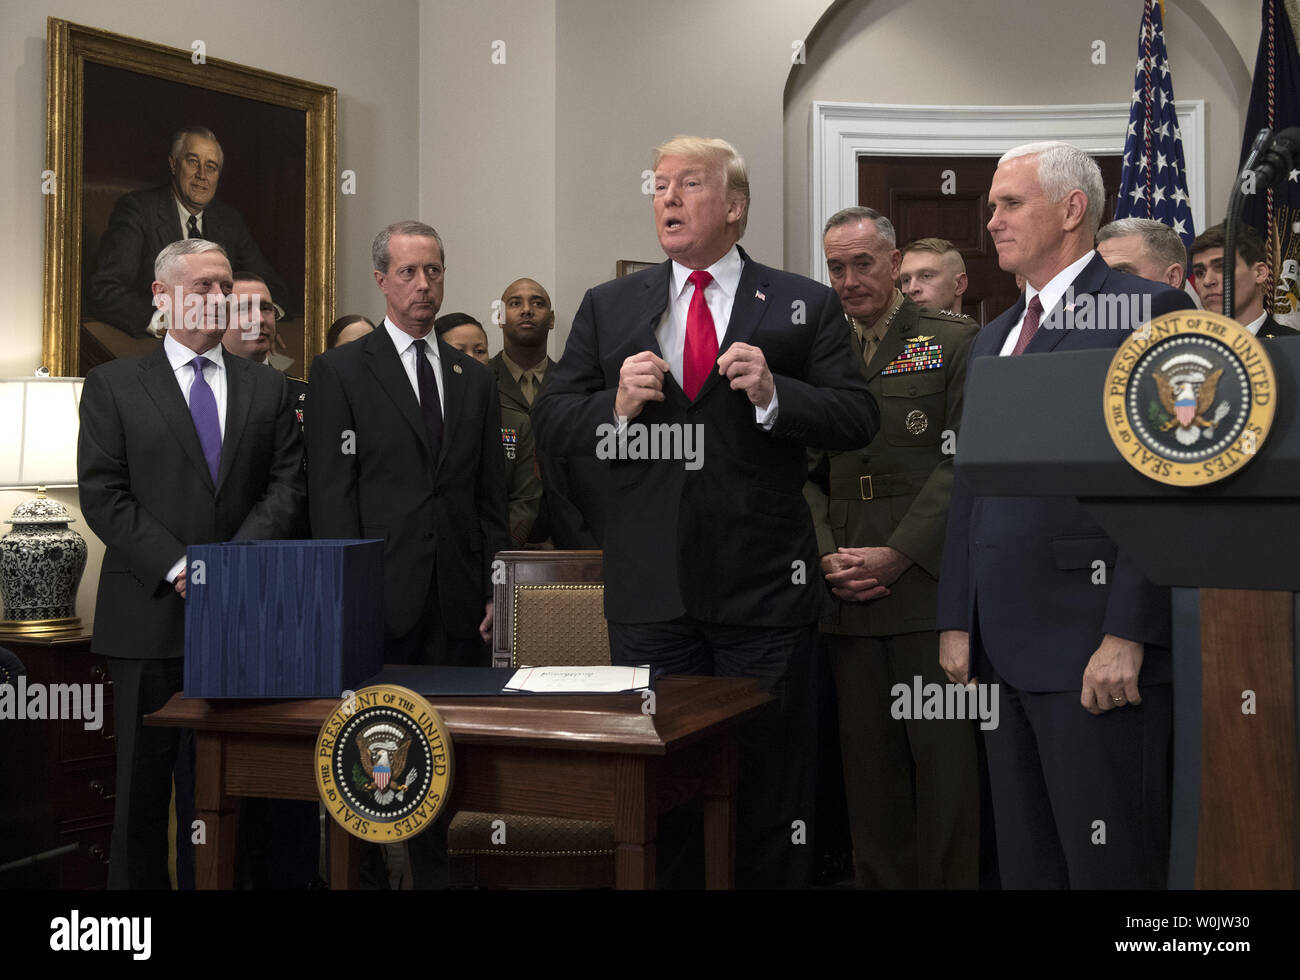 President Donald Trump adjust his jacket after signing H.R. 2810, the National Defense Authorization Act for Fiscal Year 2018, during a signing ceremony in the Roosevelt Room on December 12, 2017 in Washington, D.C. Trump was joined by, from left to right, Defense Secretary Jim Mattis, Chairman of the House Armed Services Committee Mac Thornberry, R-TX, Chairman of the Joint Chiefs of Staff Joseph F. Dunford, Vice President Mike Pence and members of the military. Photo by Kevin Dietsch/UPI Stock Photo